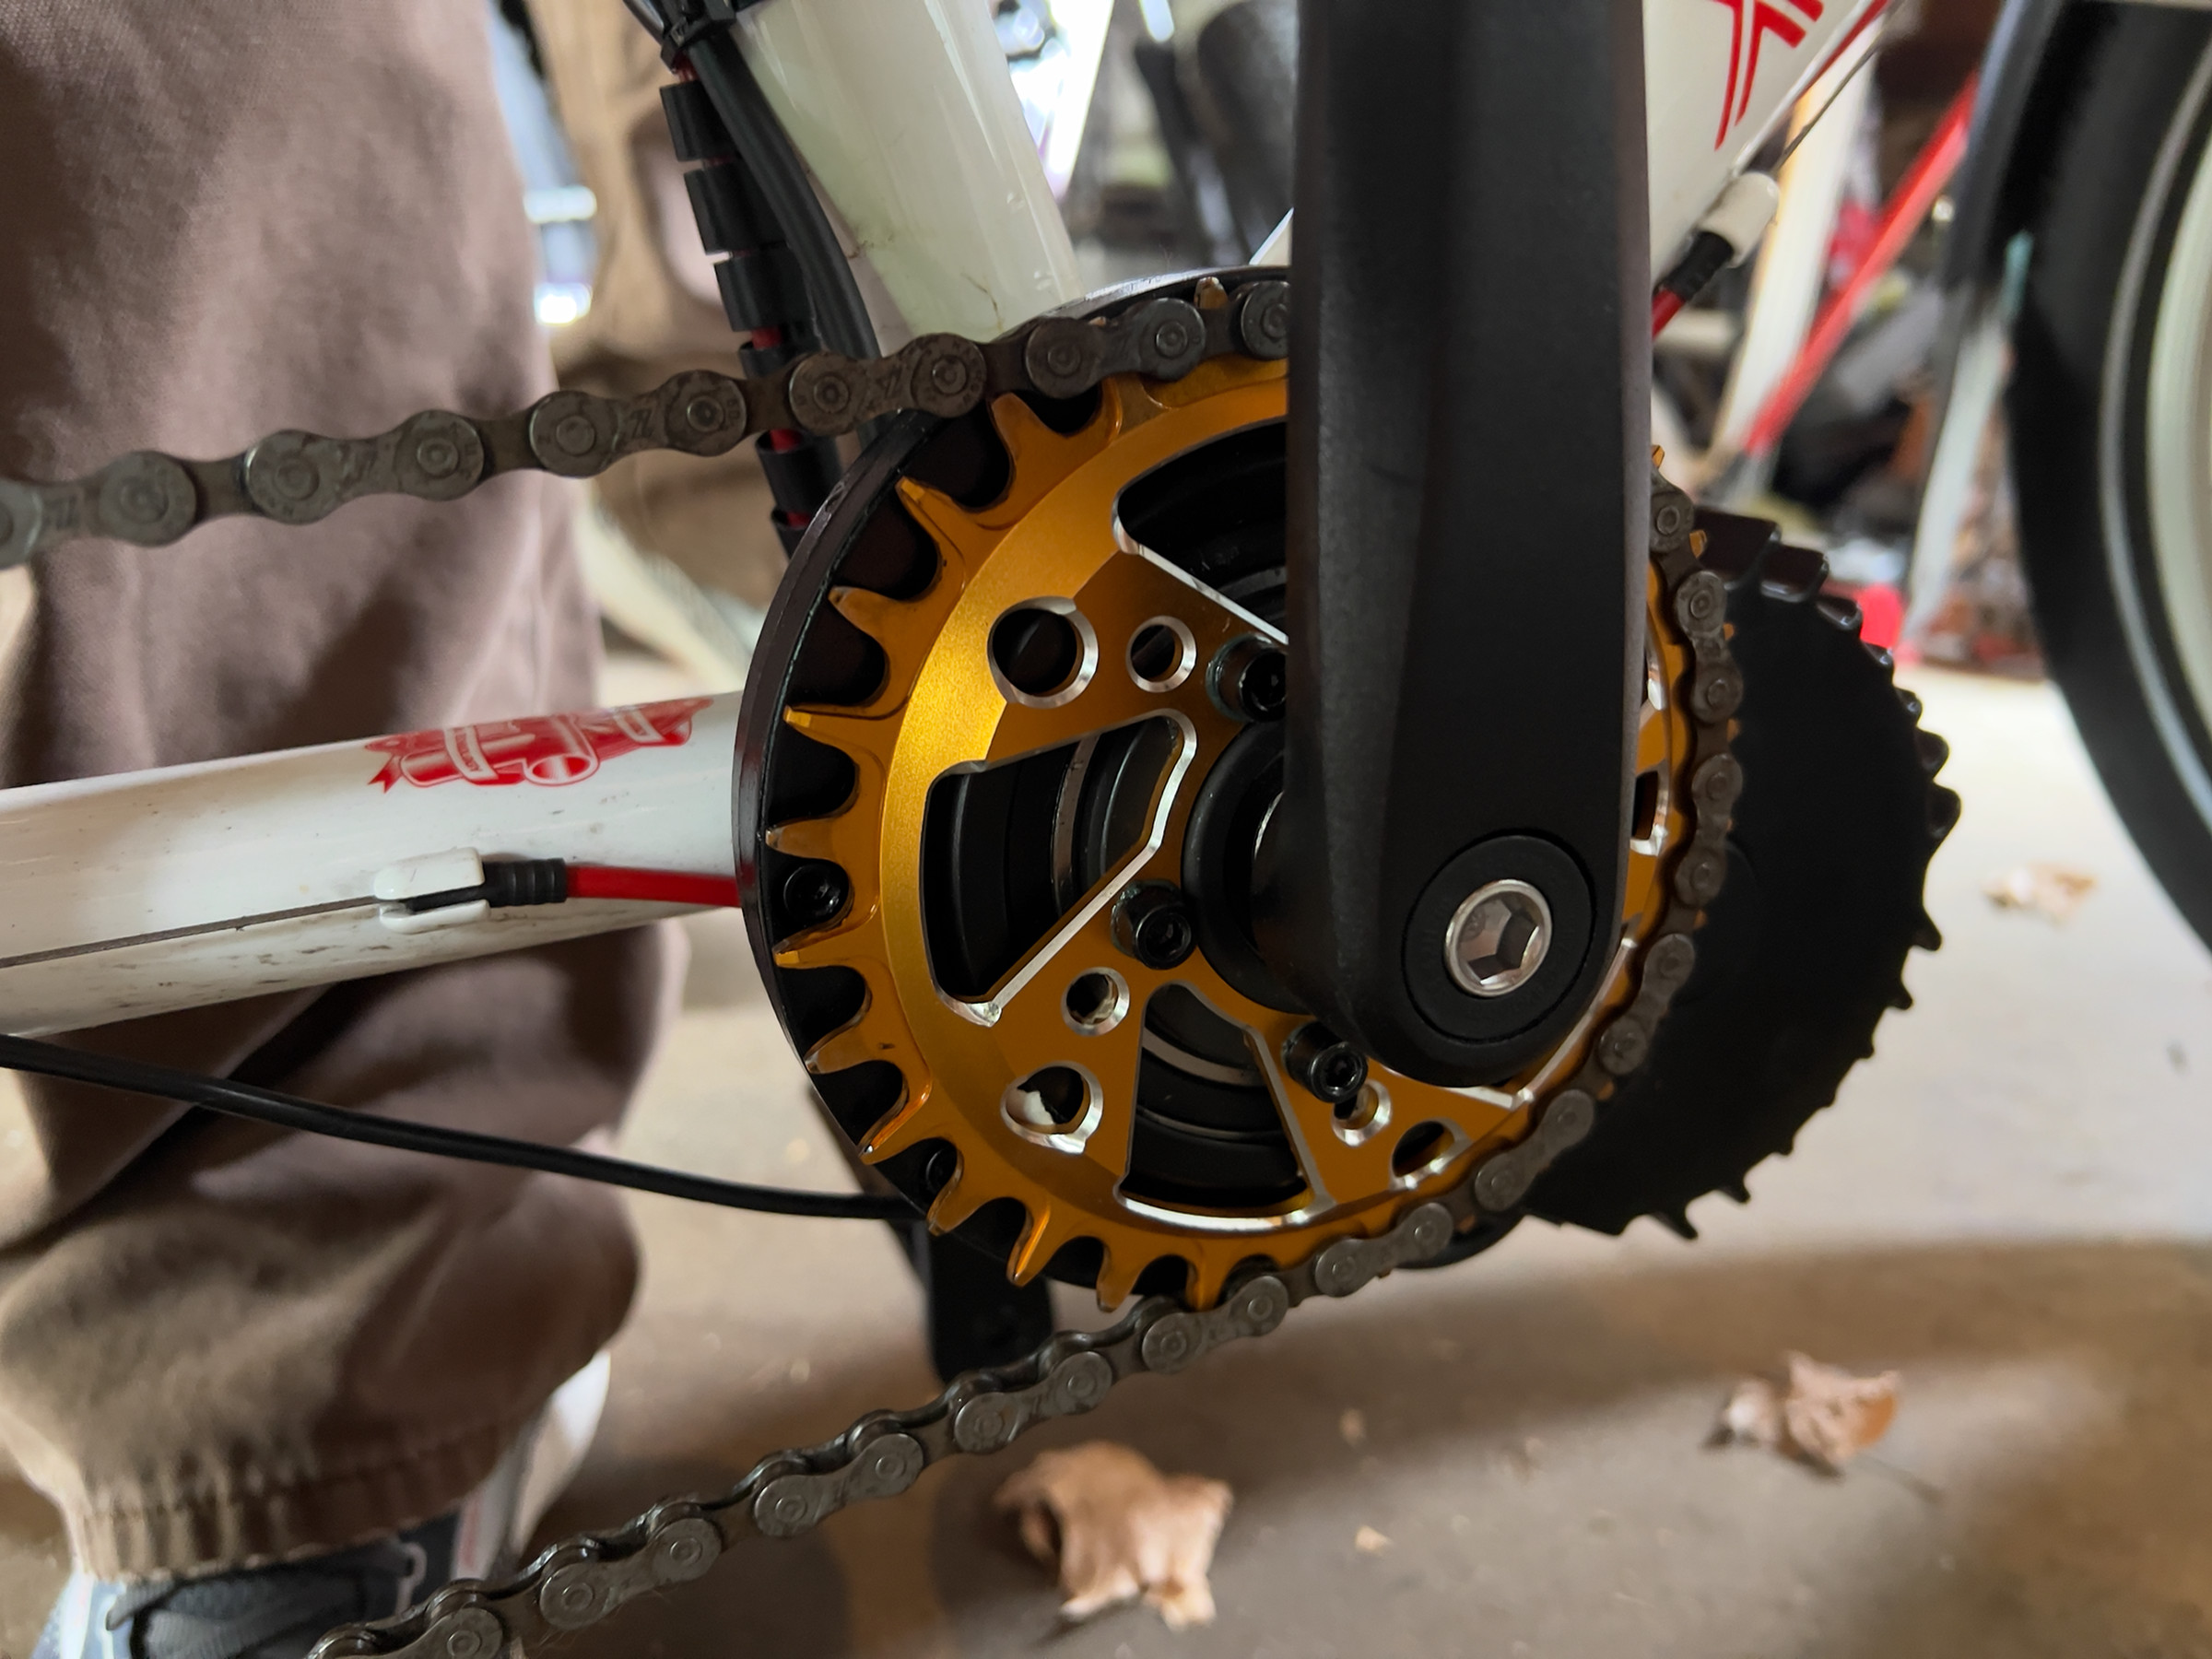 A close-up picture of the chainring installed on the bike.